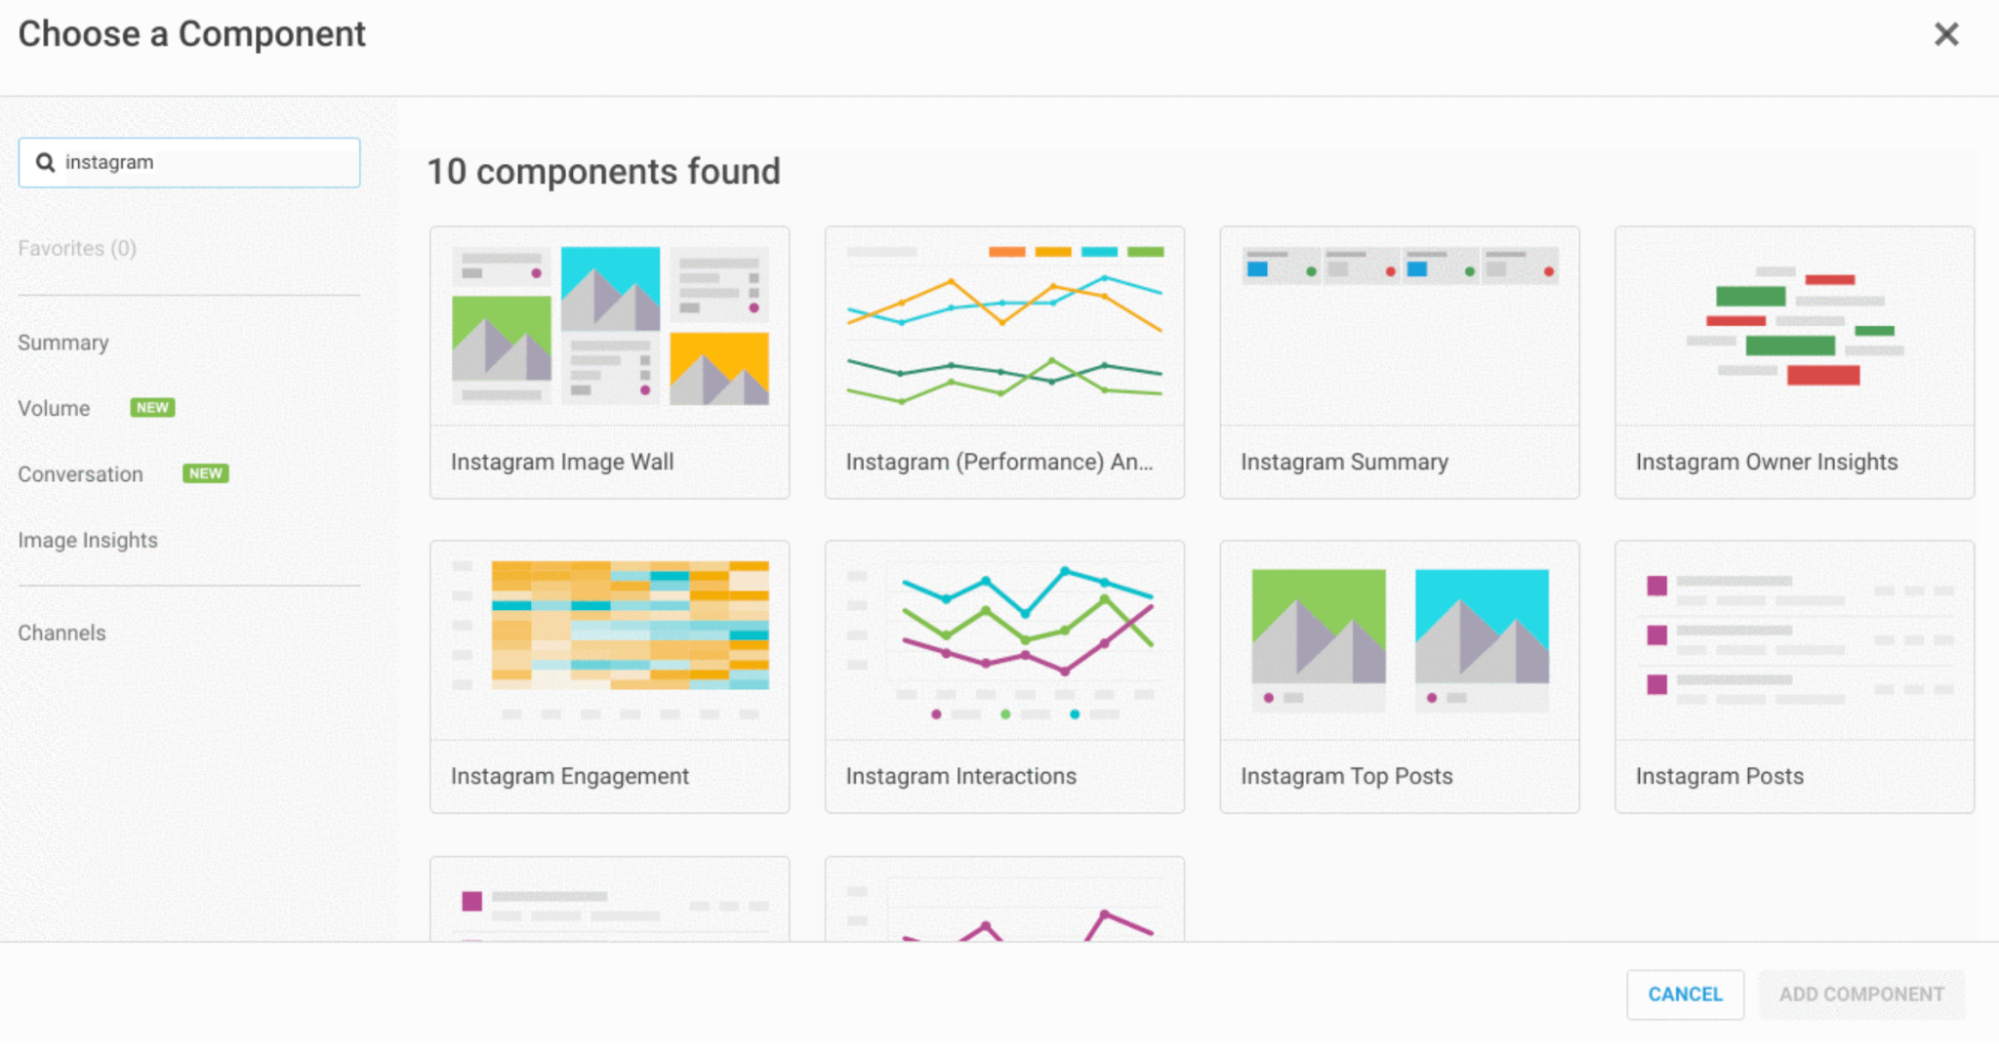 Brandwatch's Component Picker employs AI to display different data visualizations, allowing marketers to monitor brand sentiment in a variety of ways